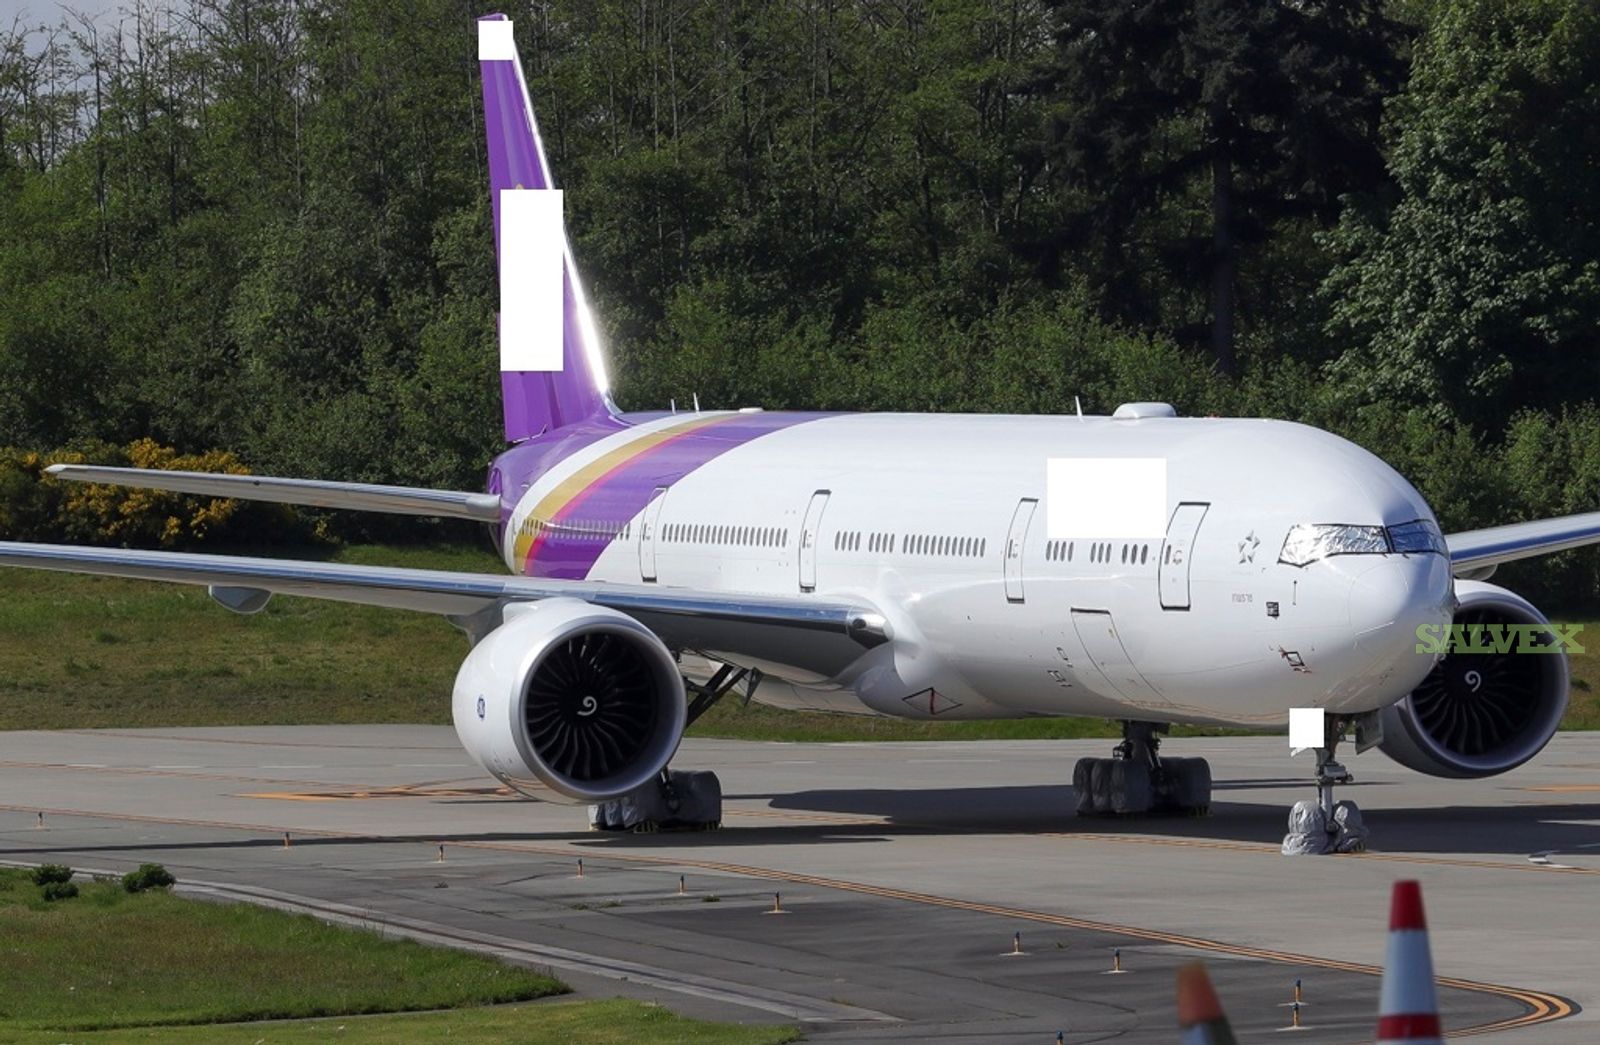 Boeing 777-300 Aircraft in As-Is, Where-Is Condition (1 Aircraft)